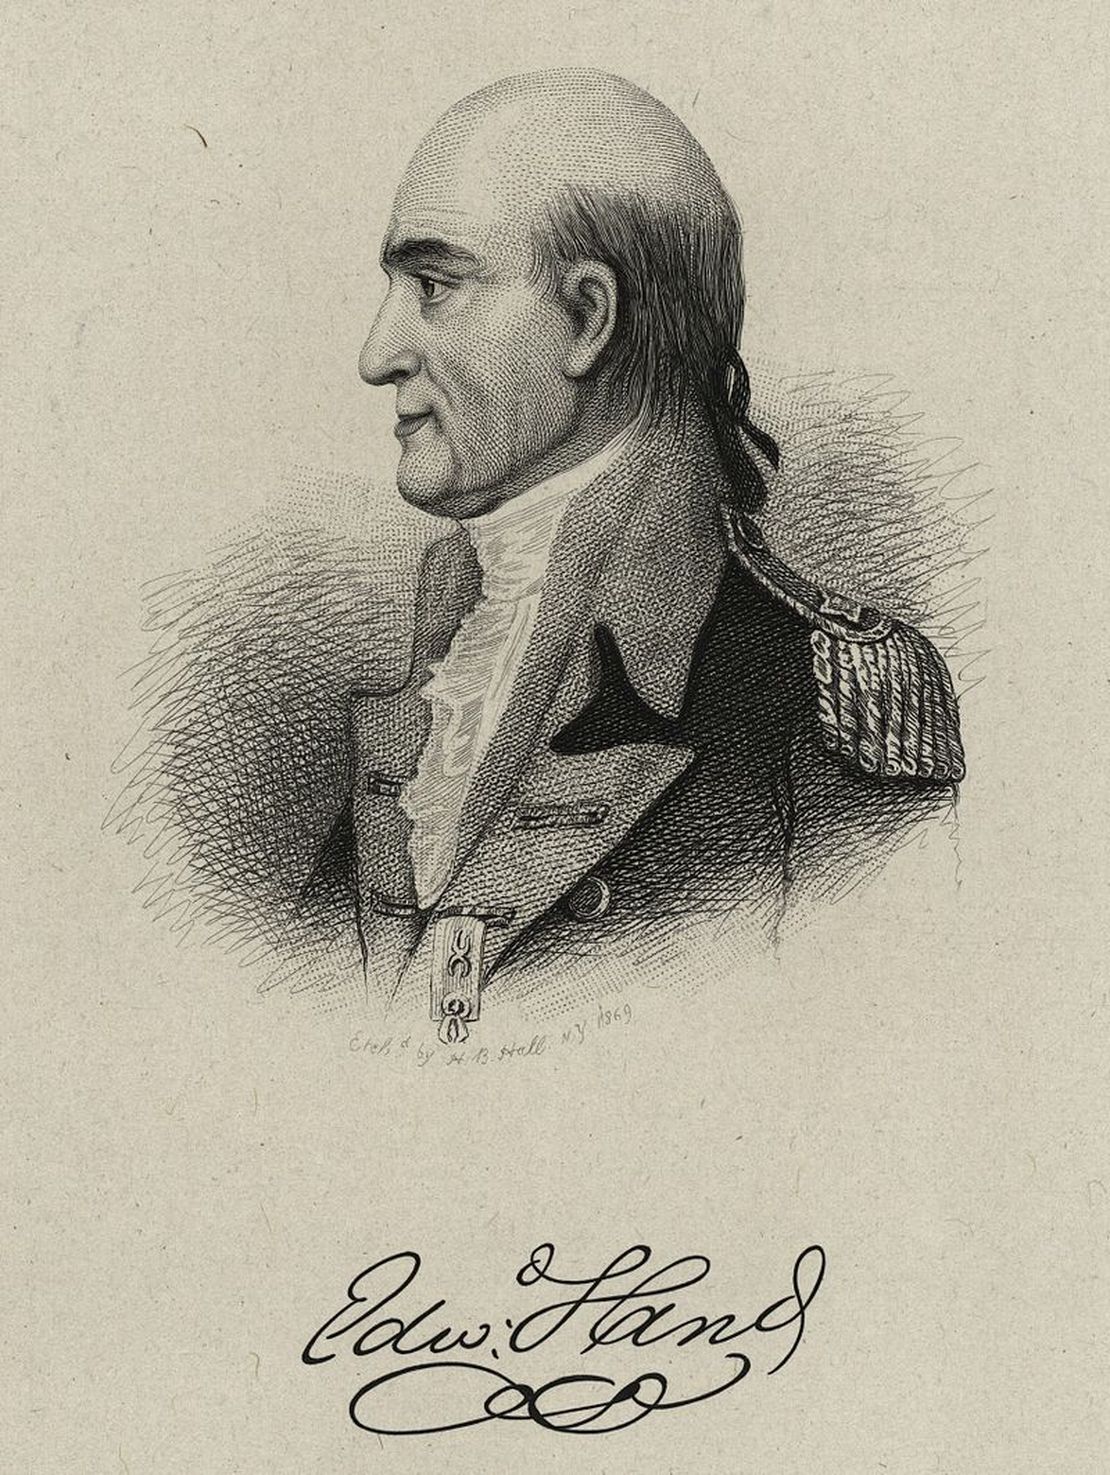 Irish-born Edward Hand is appointed a Brigadier General in the Continental Army